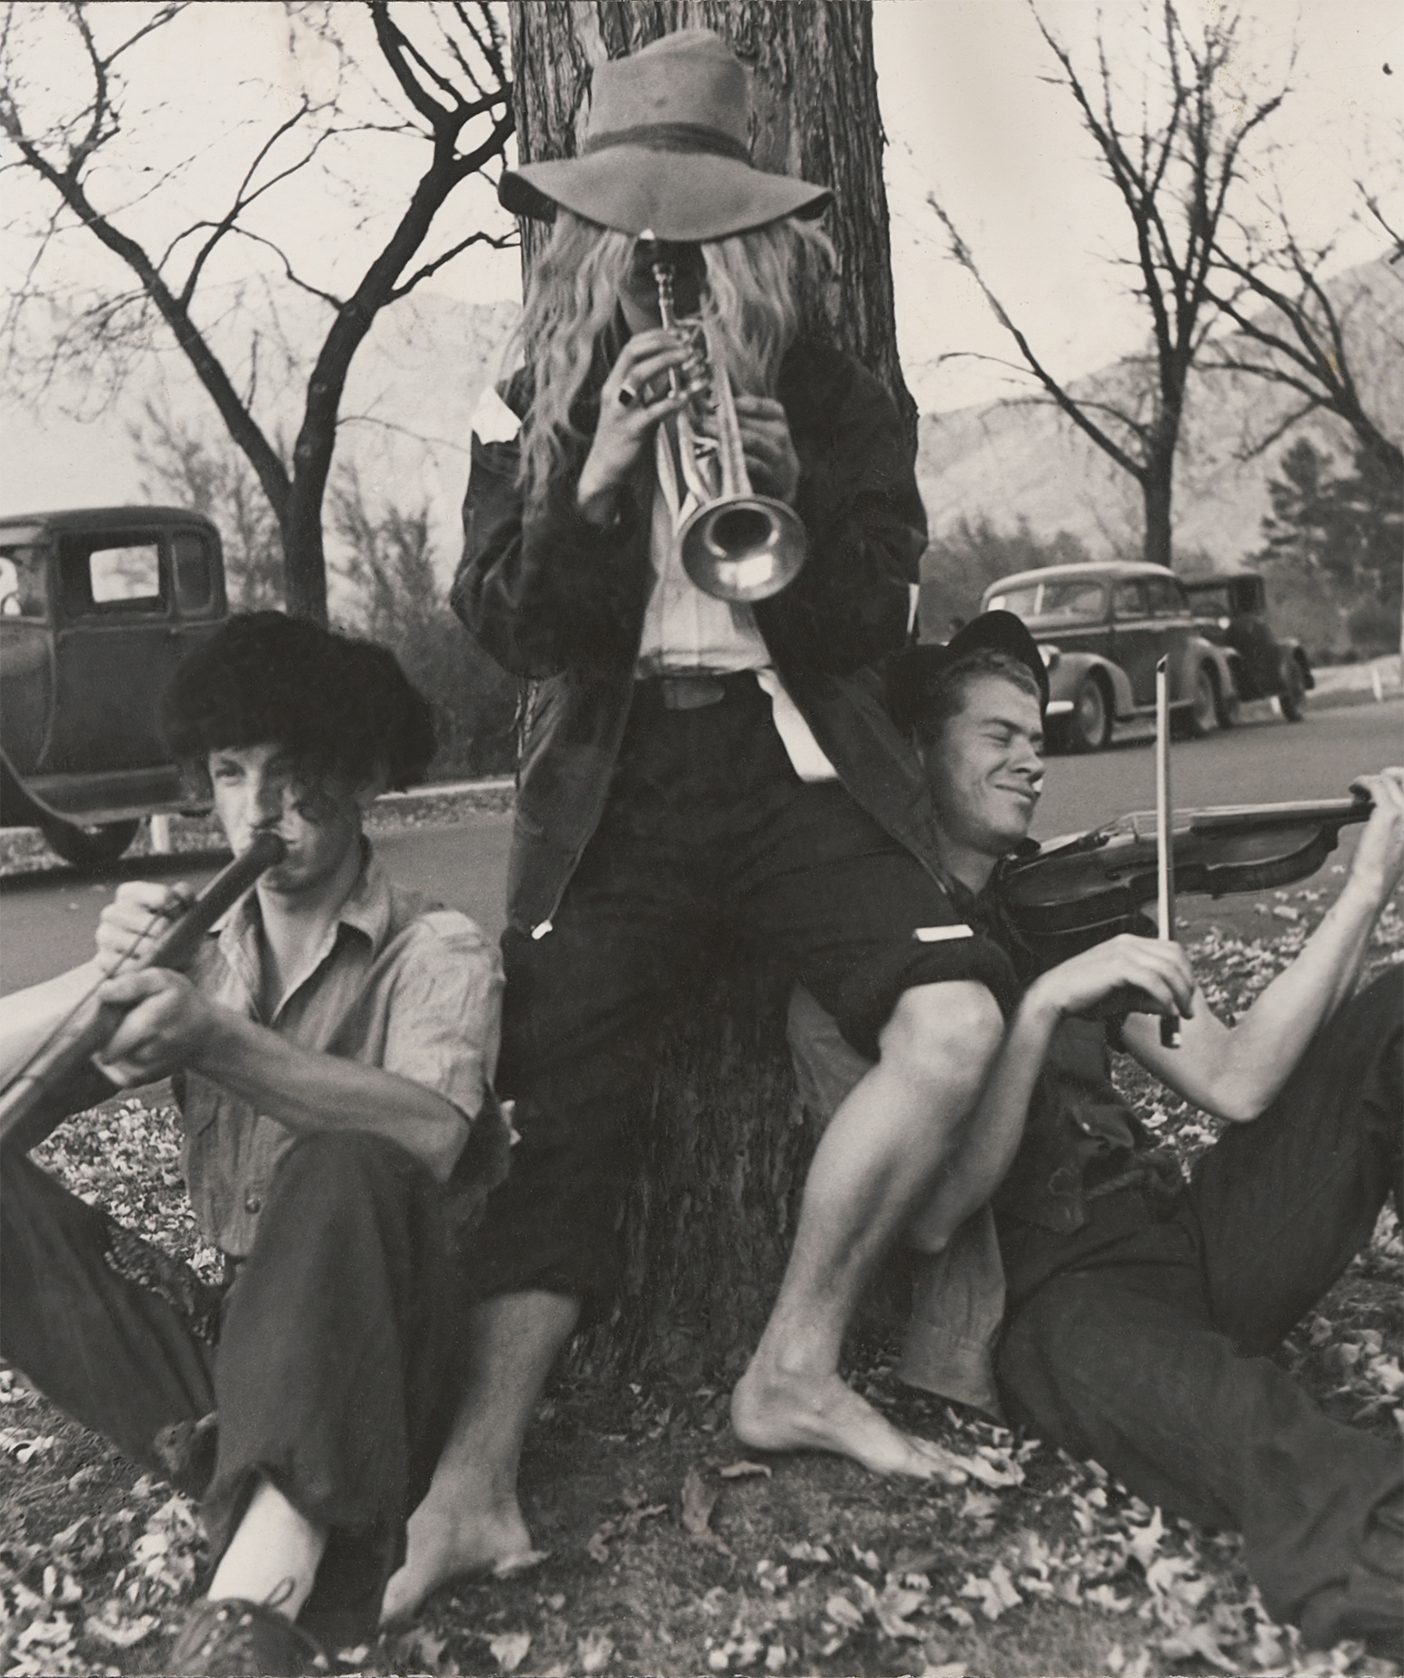 A black and white photo from the 1940s of three BYU students dressed up in hobo costumes and playing instruments.